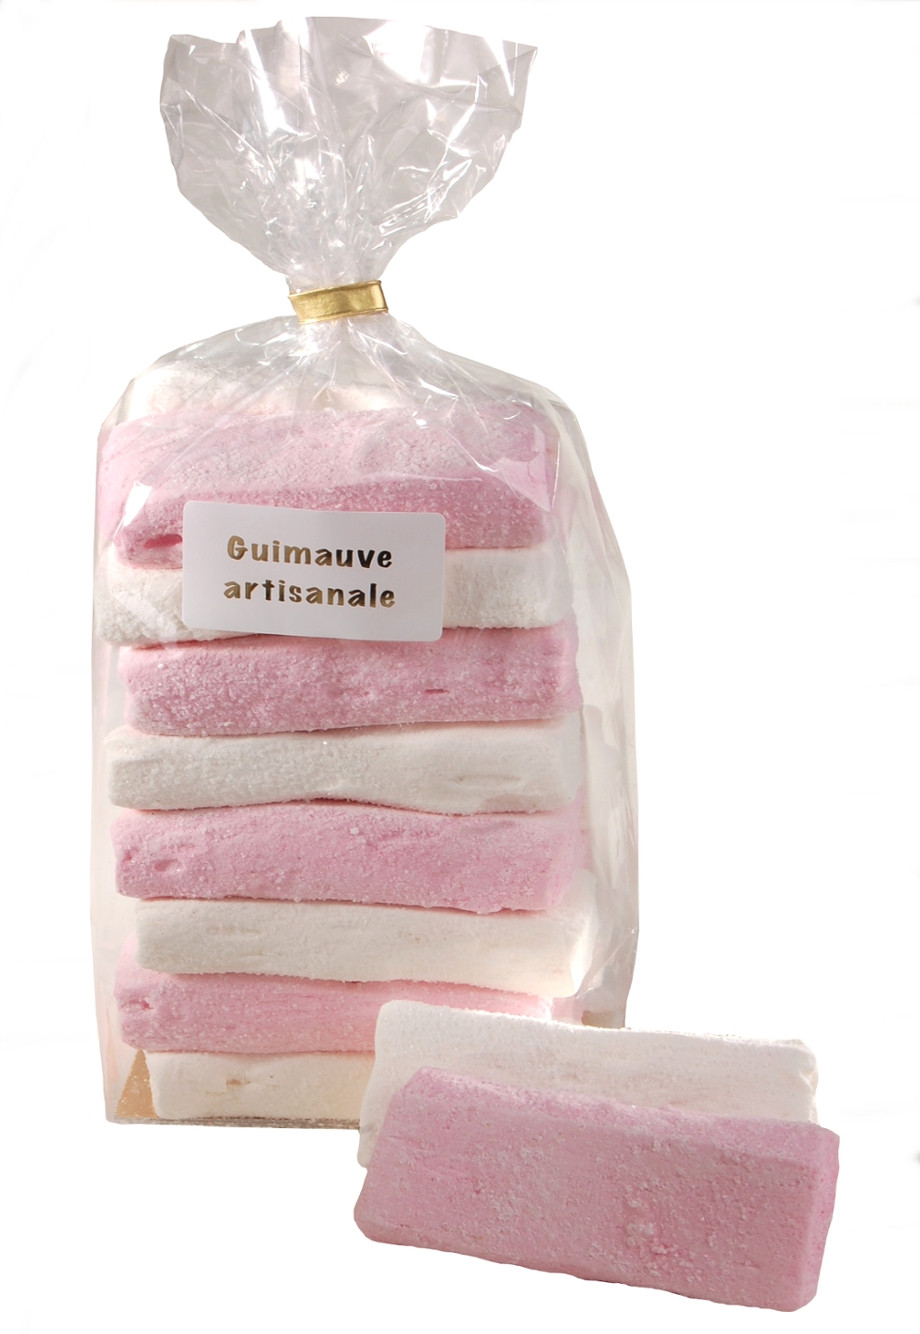 White and pink marshmallow